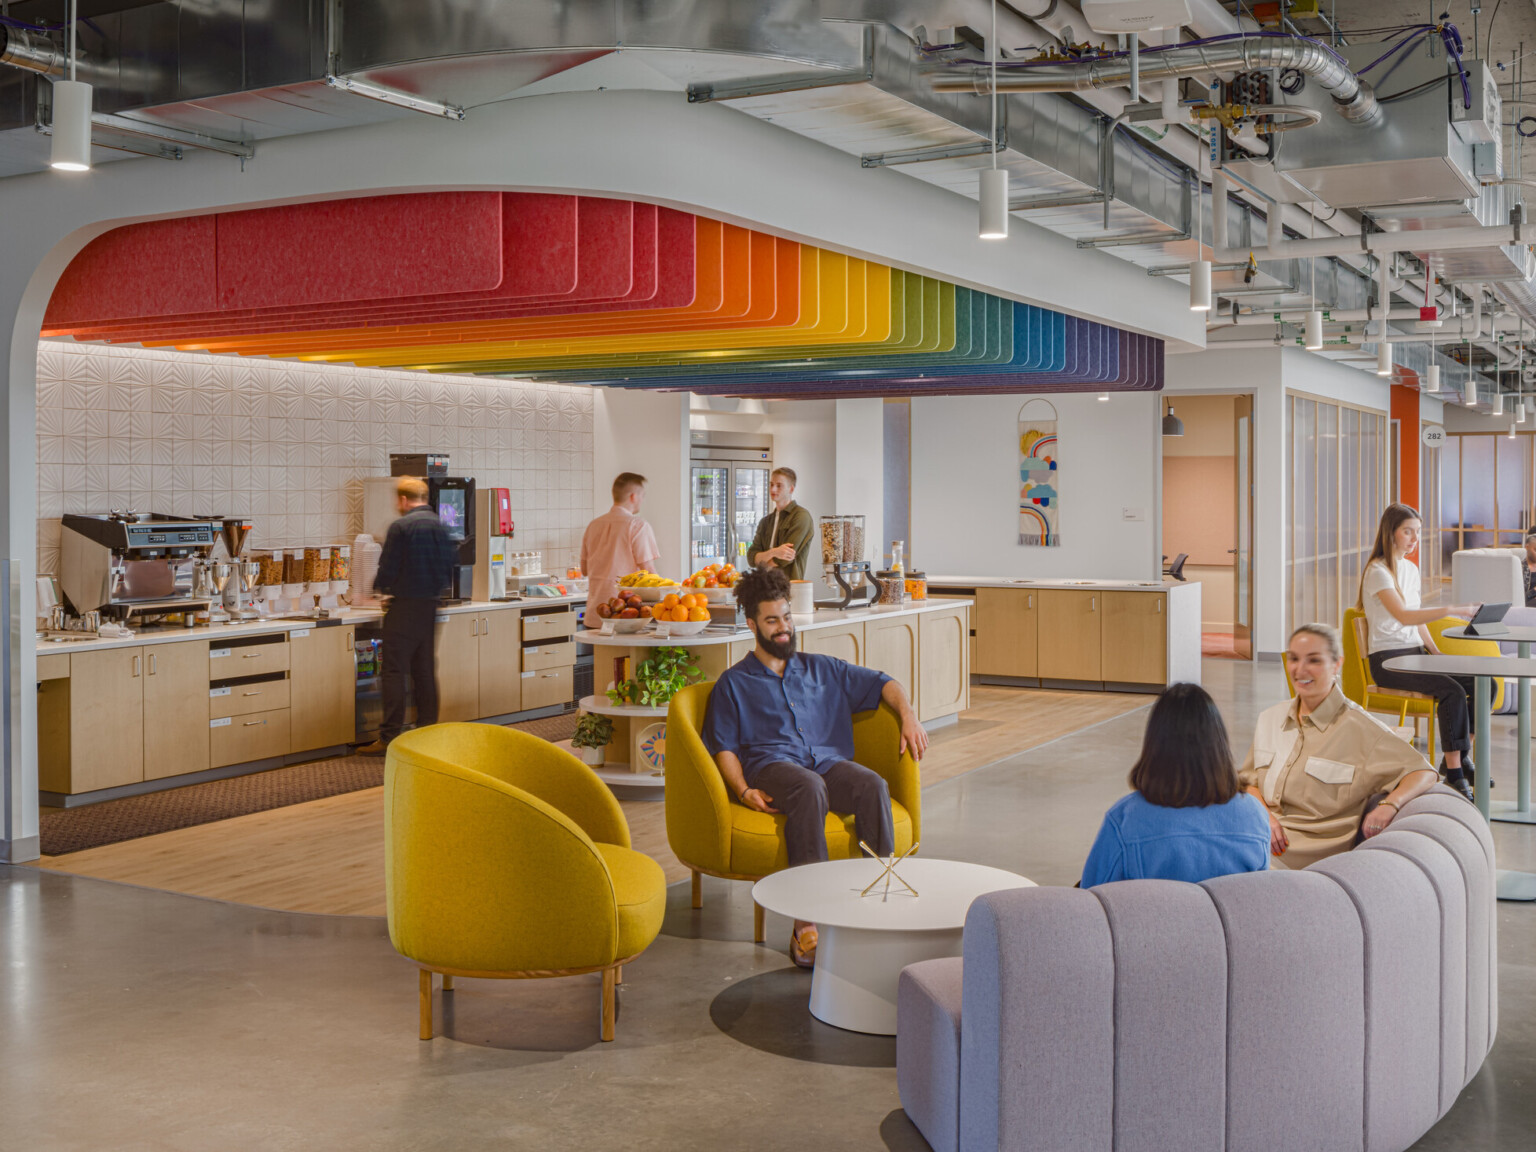 Vibrant seating area showcasing a rainbow ceiling over a coffee bar surrounded by seating areas with yellow chairs and plush couches